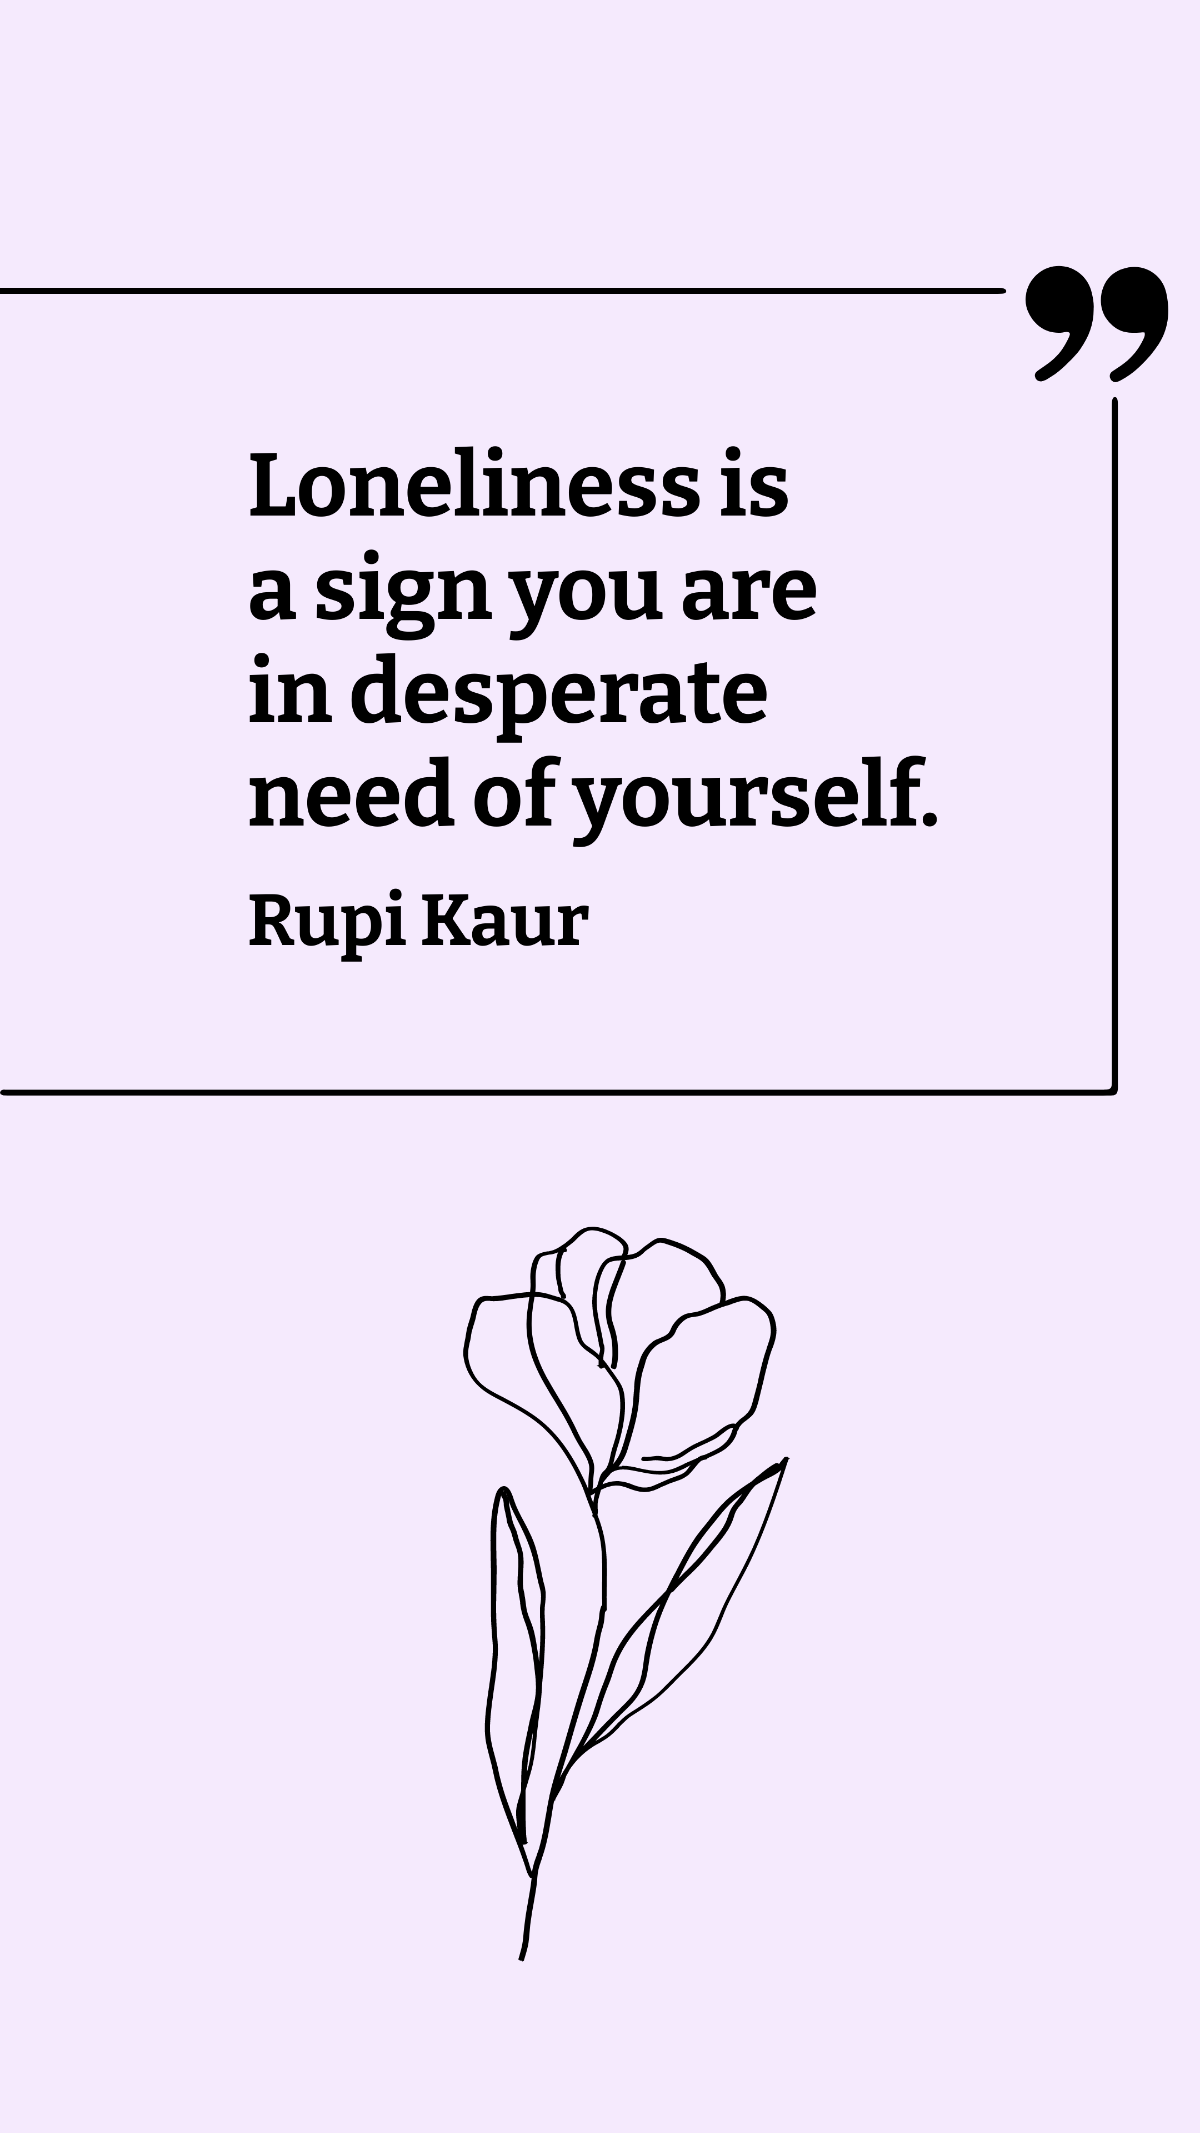 Rupi Kaur - Loneliness is a sign you are in desperate need of yourself. Template